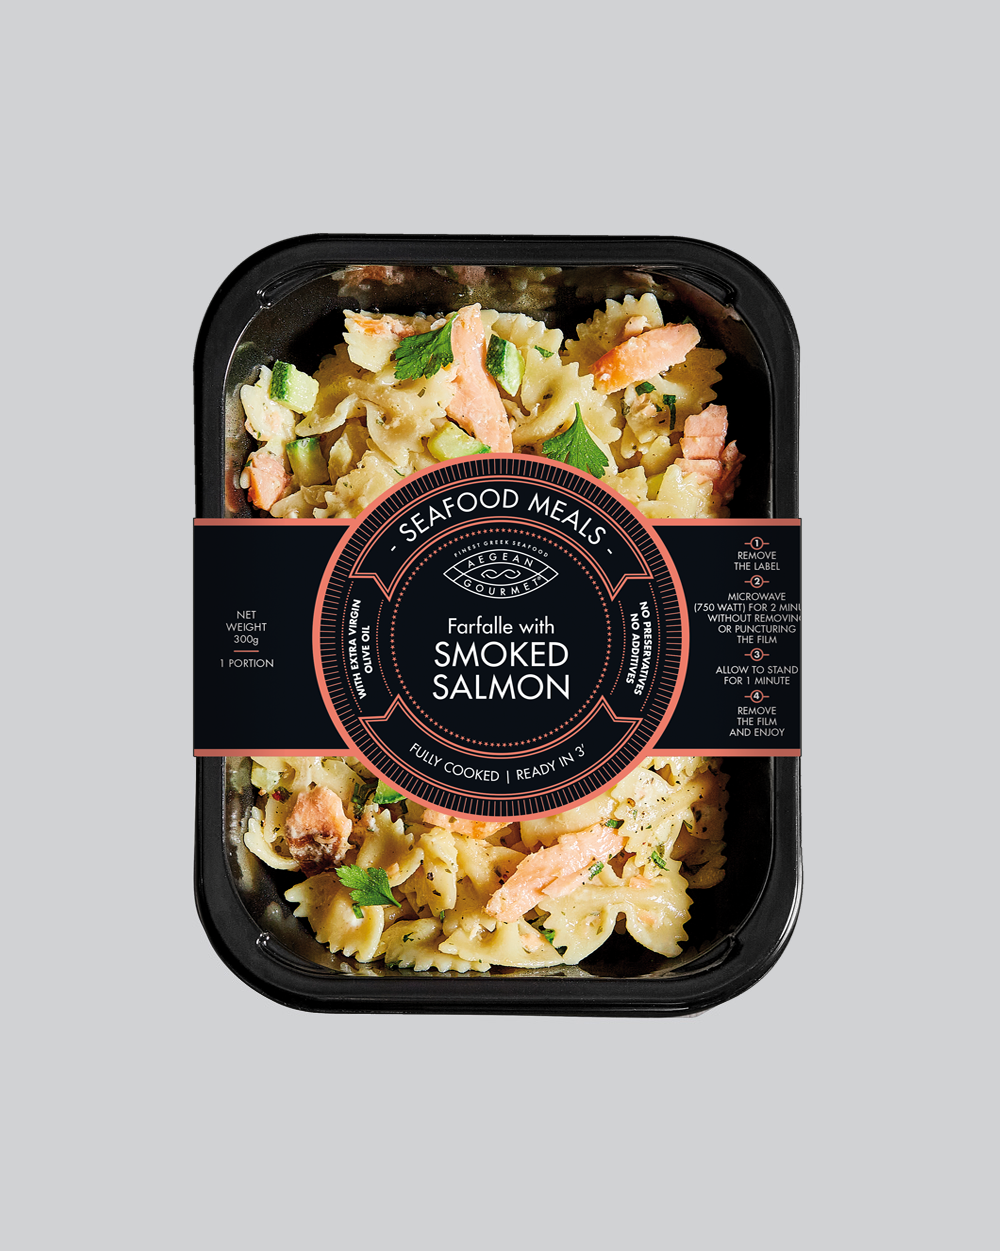 Seafood Meal product into packaging, Farfalle with smoked salmon